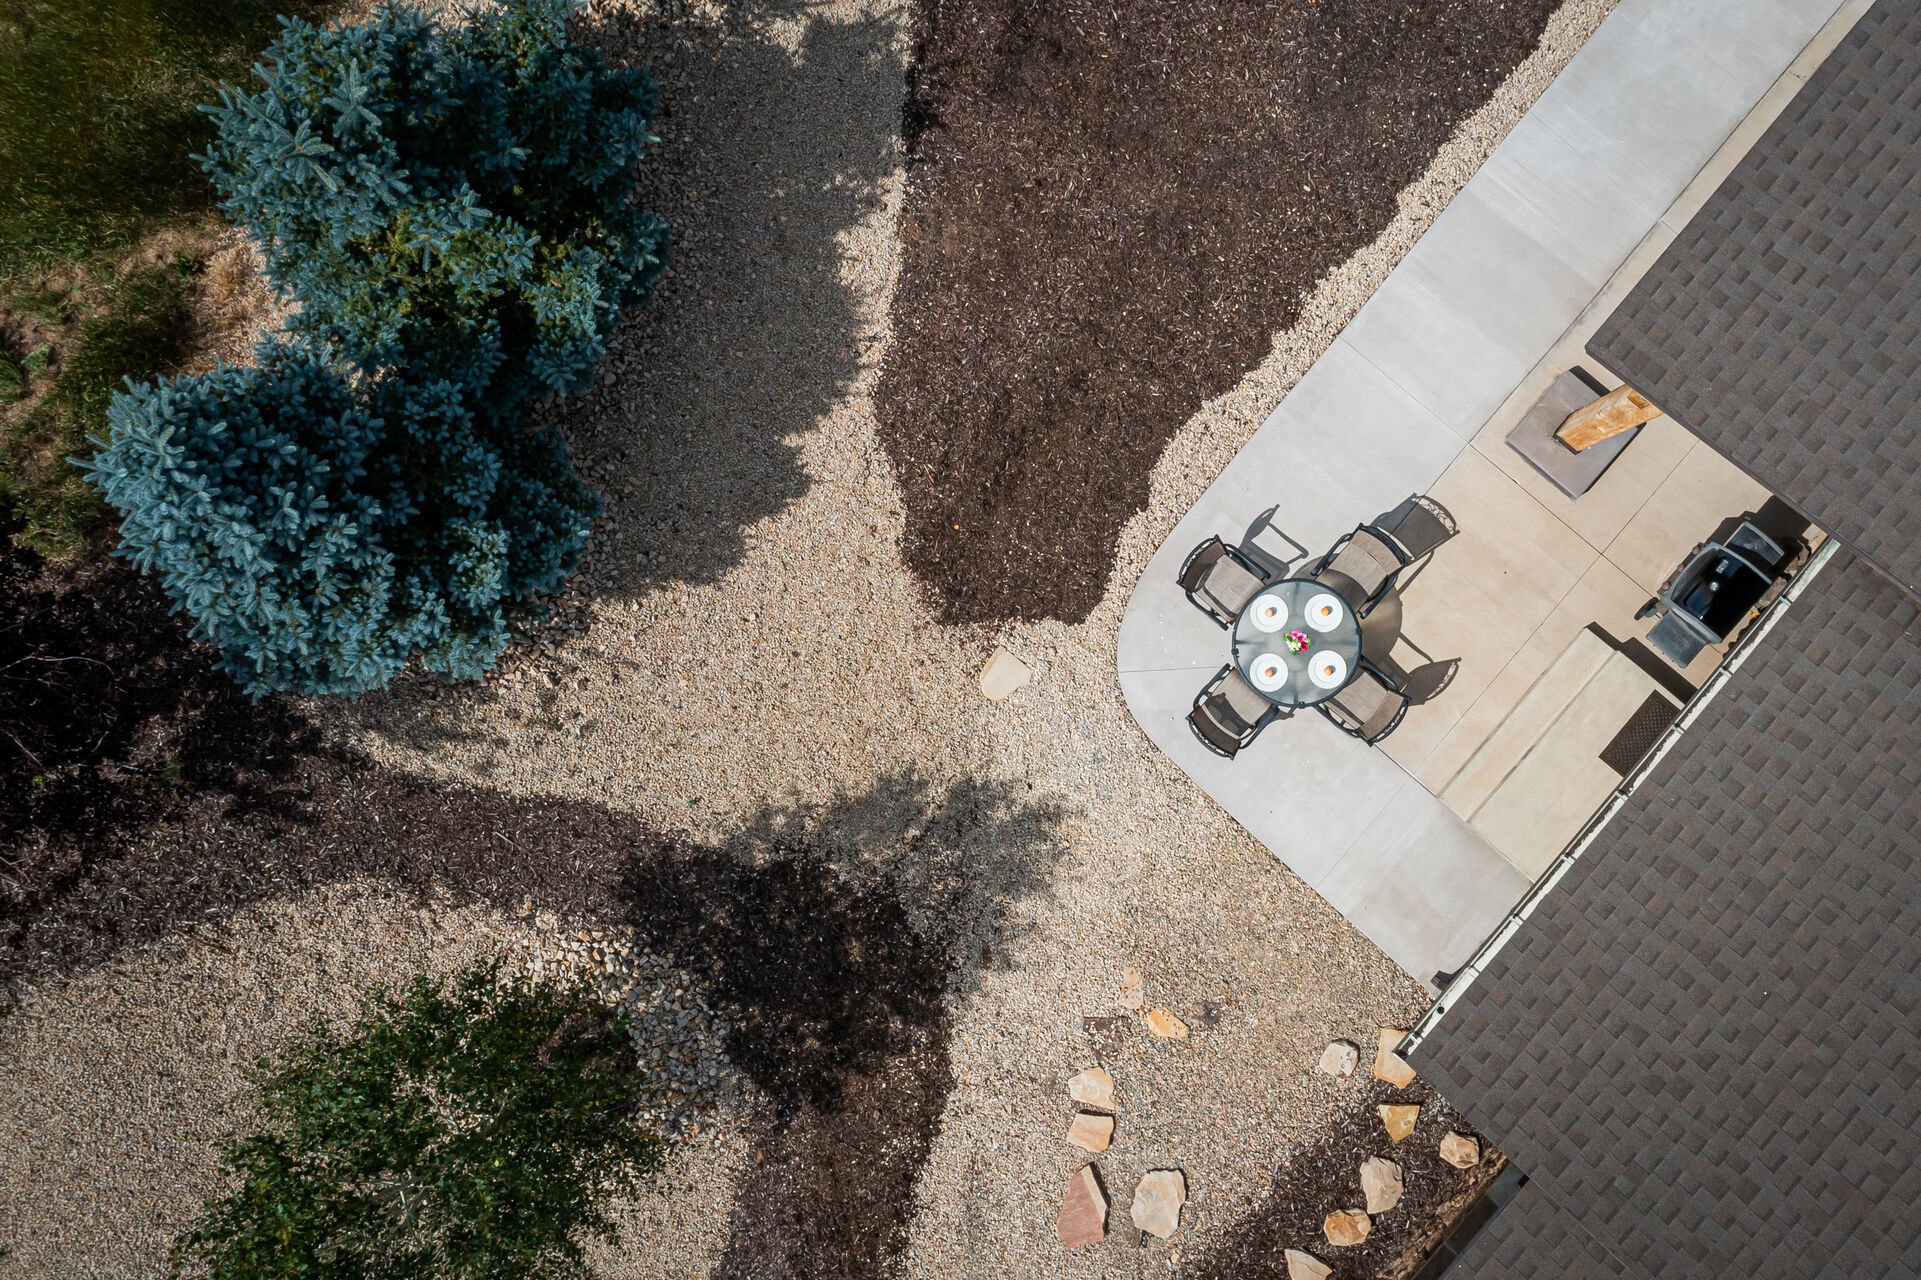 Patio dining area from above